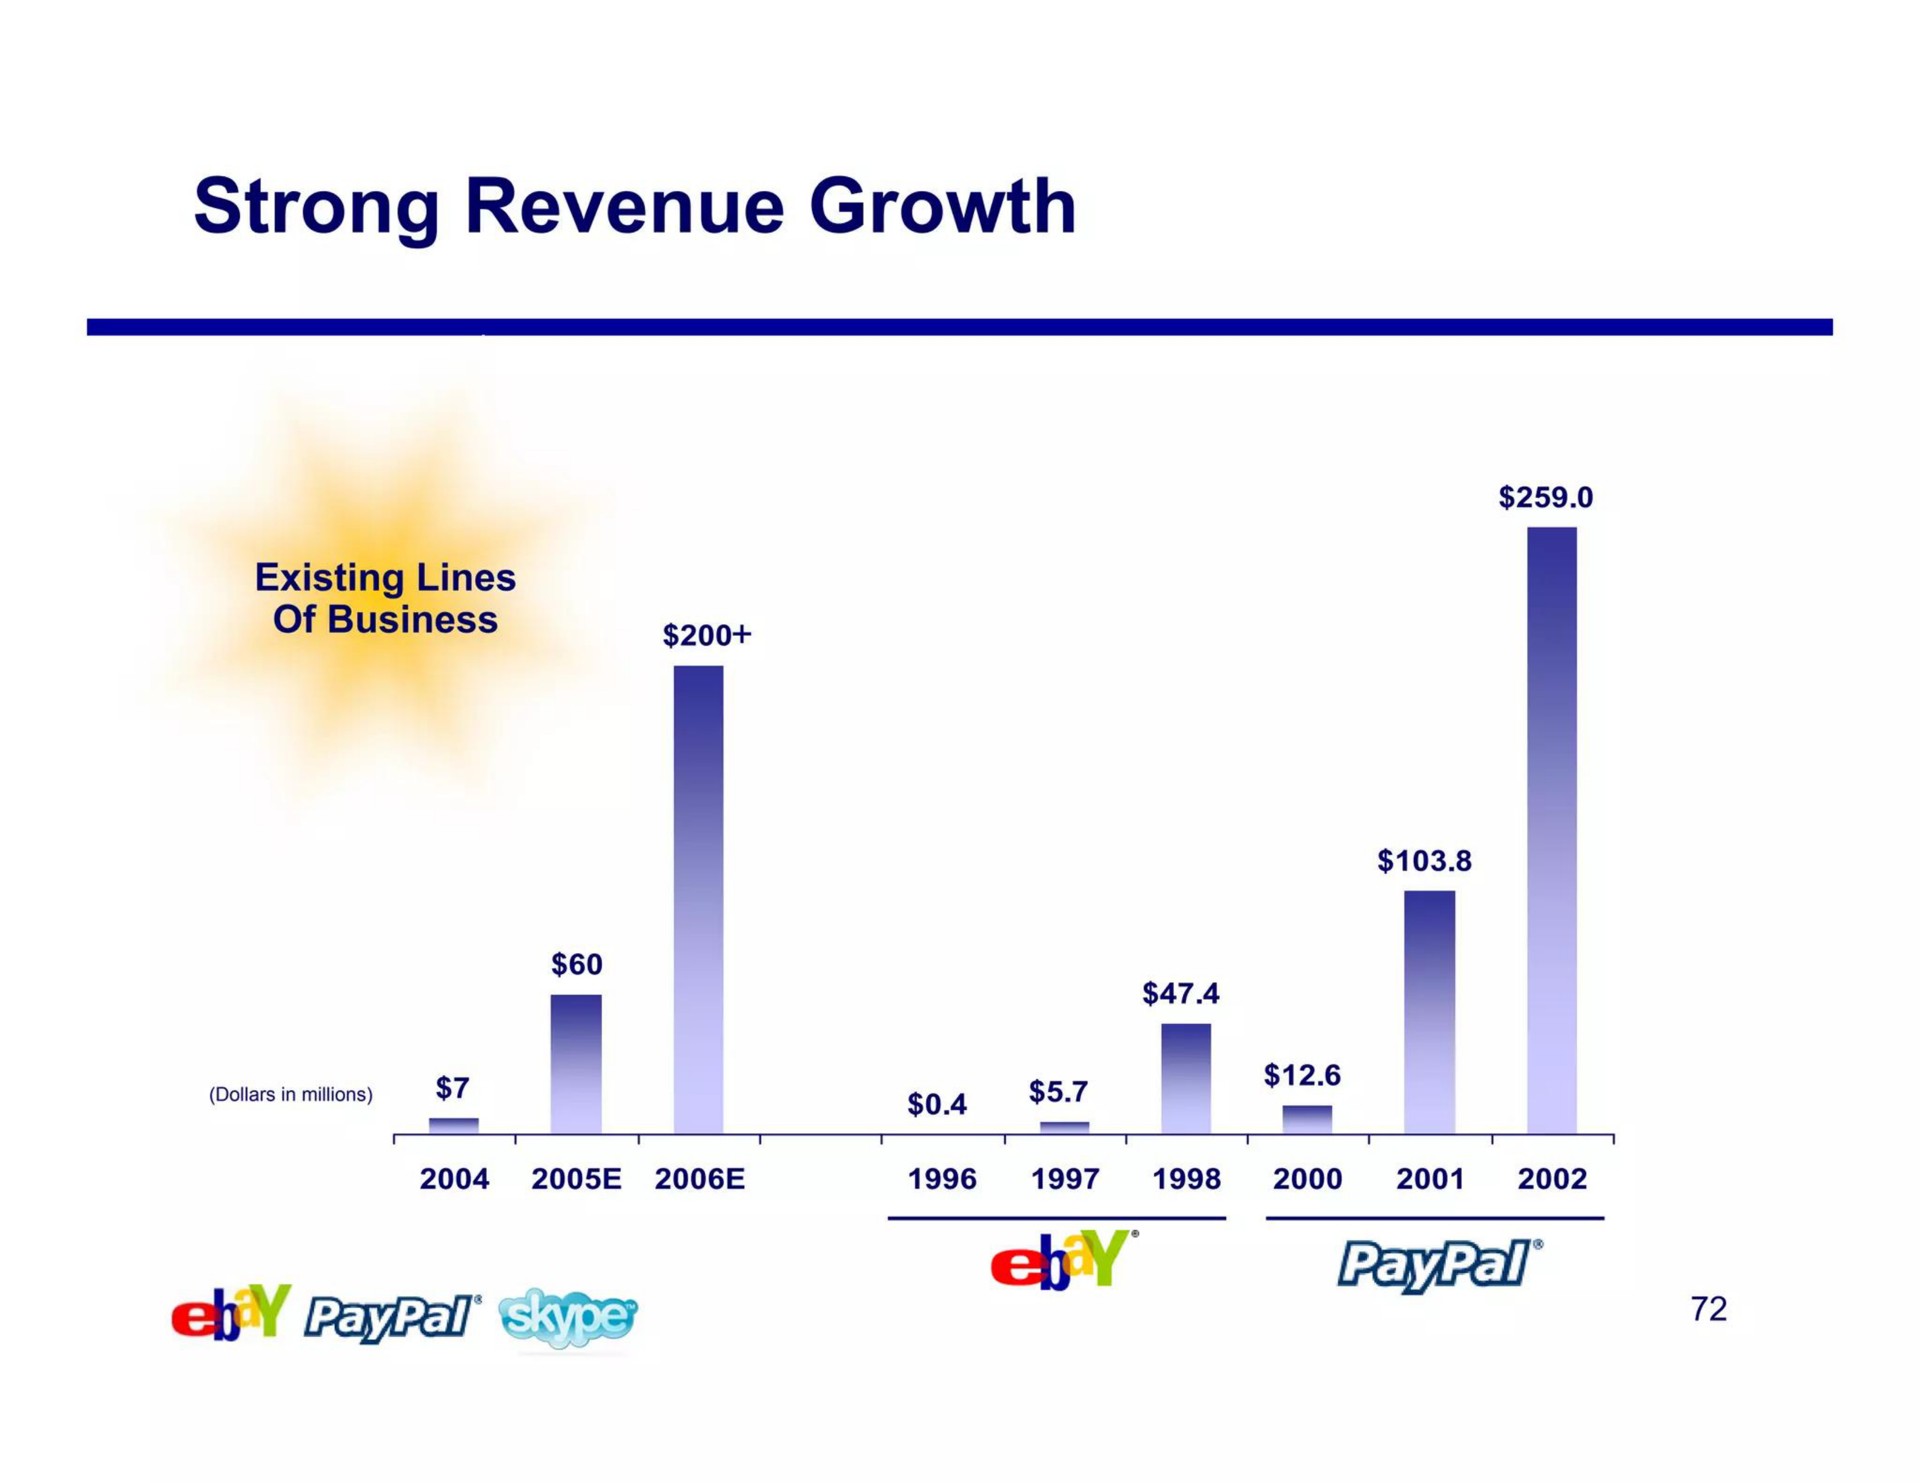 strong revenue growth | eBay